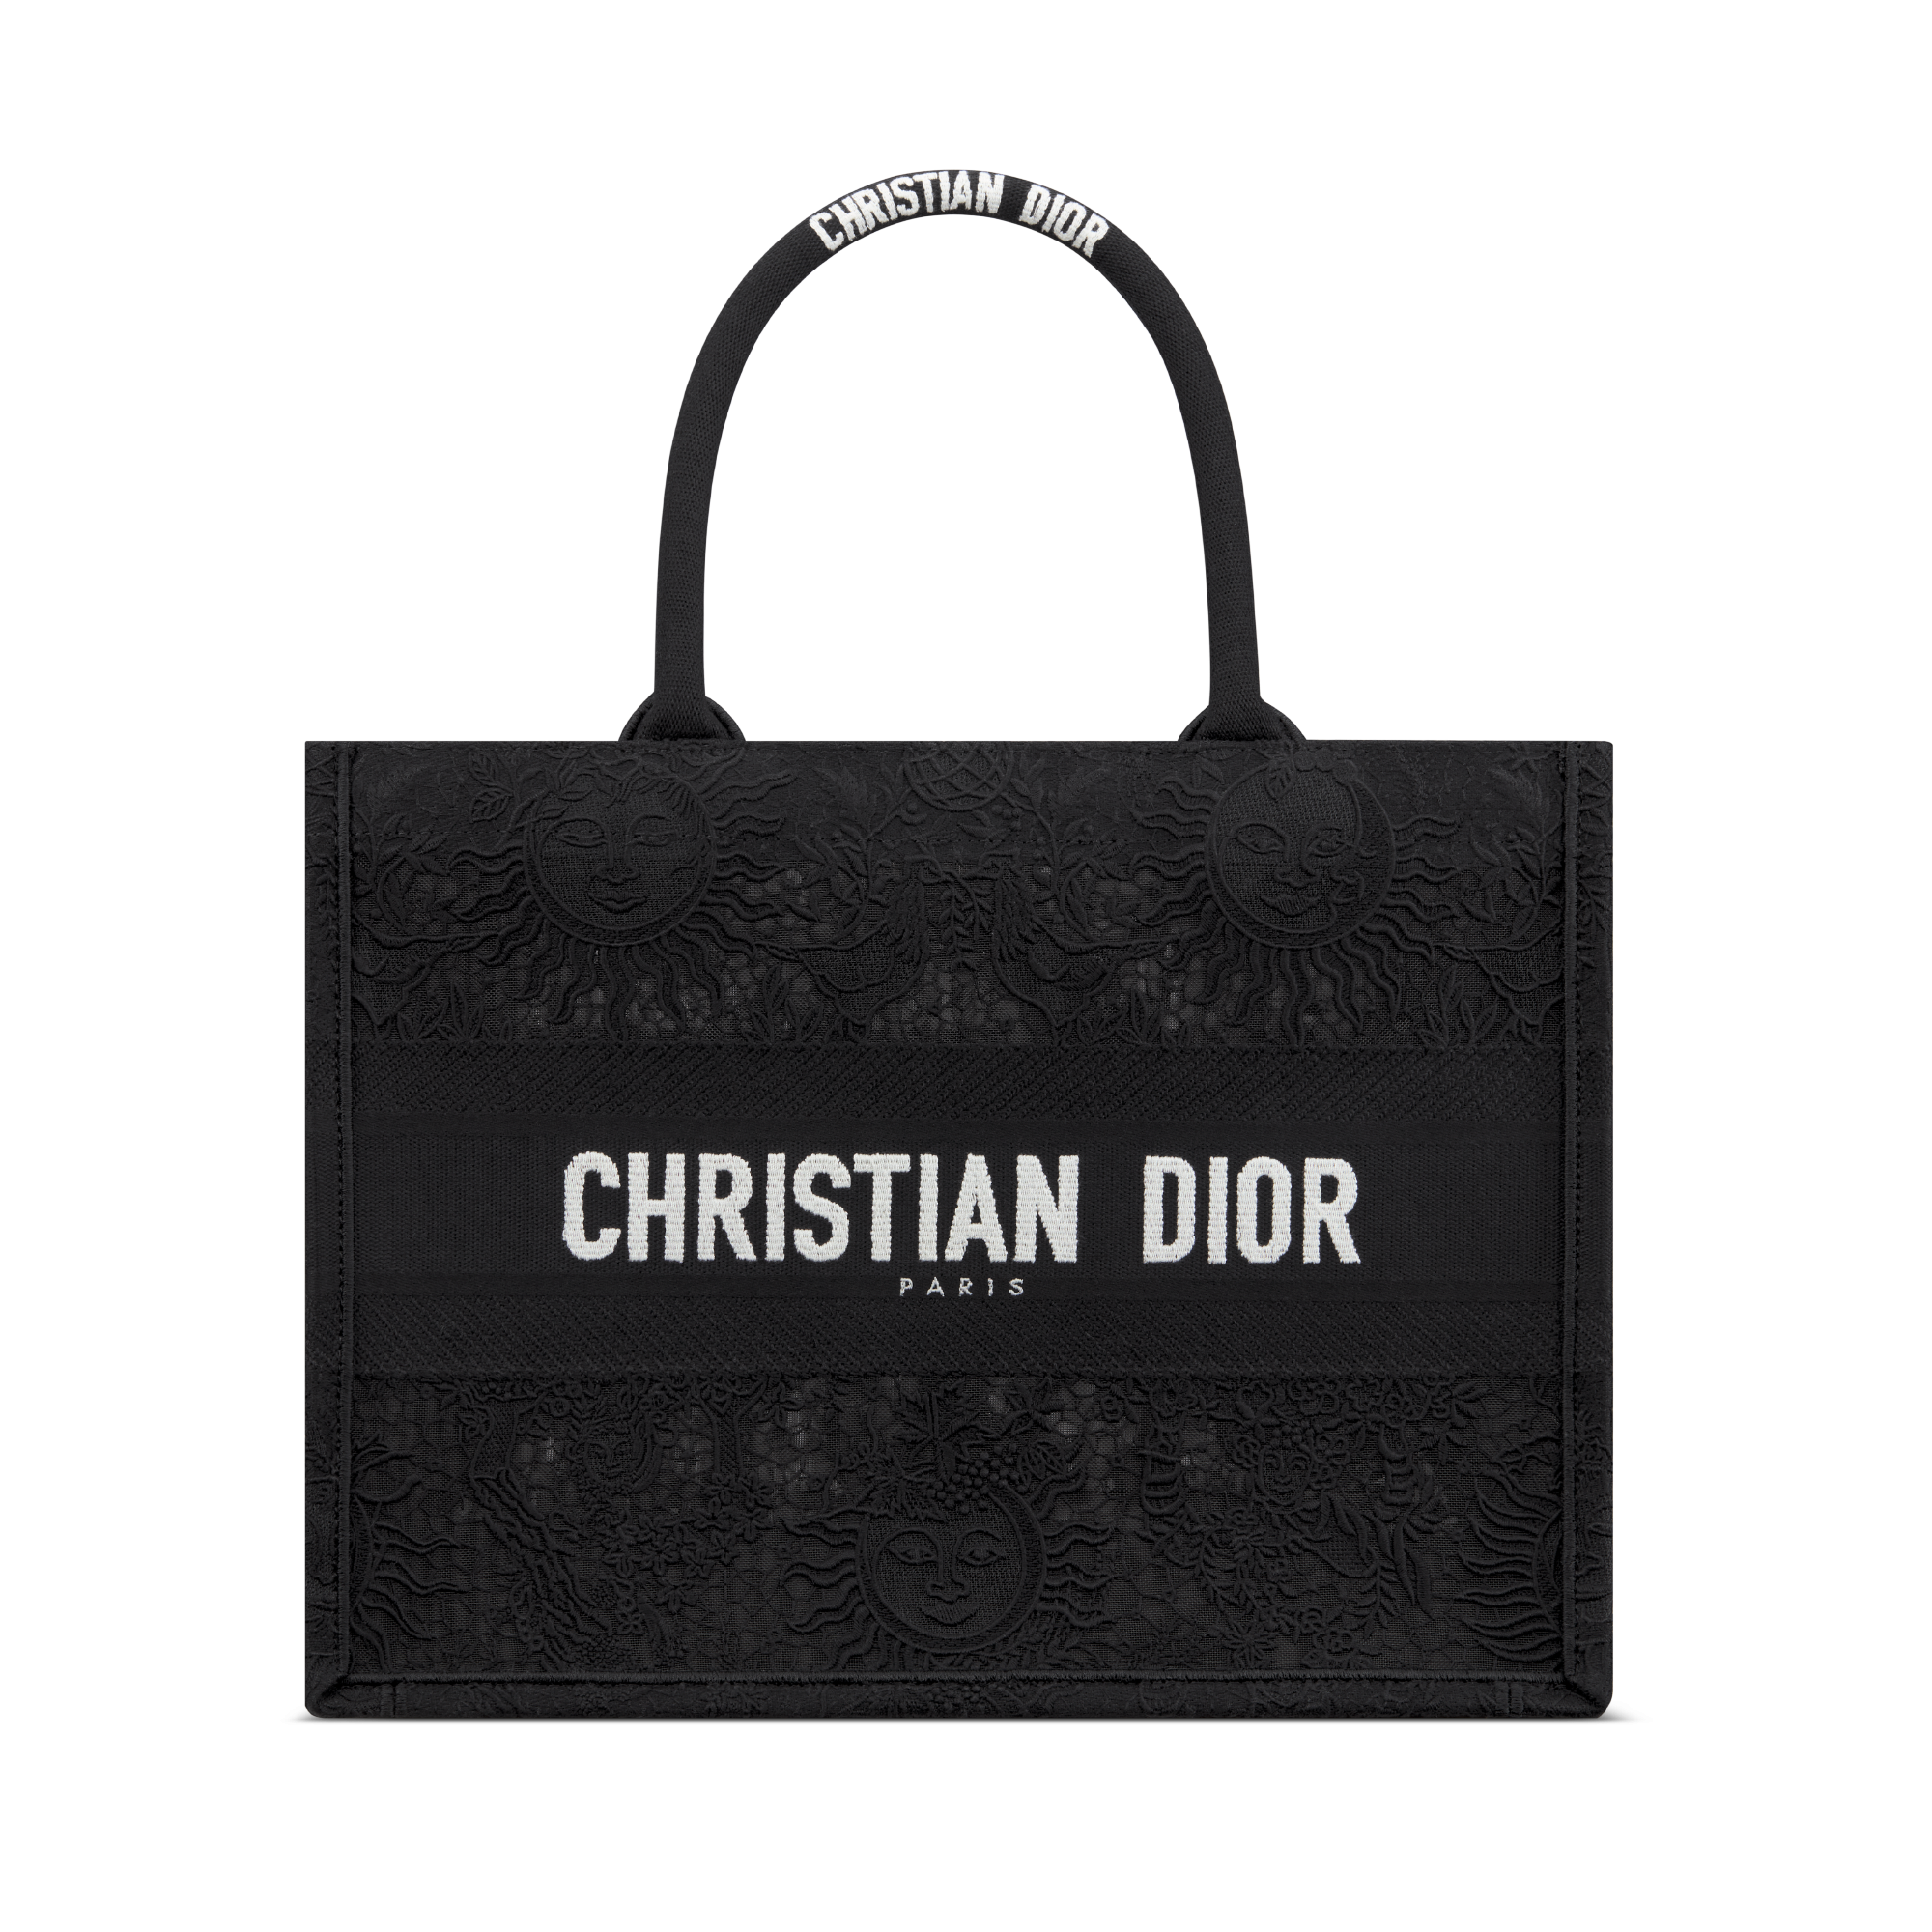 compose?brand=dior&model=small book tote&version=645&p=base:embroidery:m1296zecym911&initials=&size=718&logic=1&initials profile=style::m1296zecym911&size=828